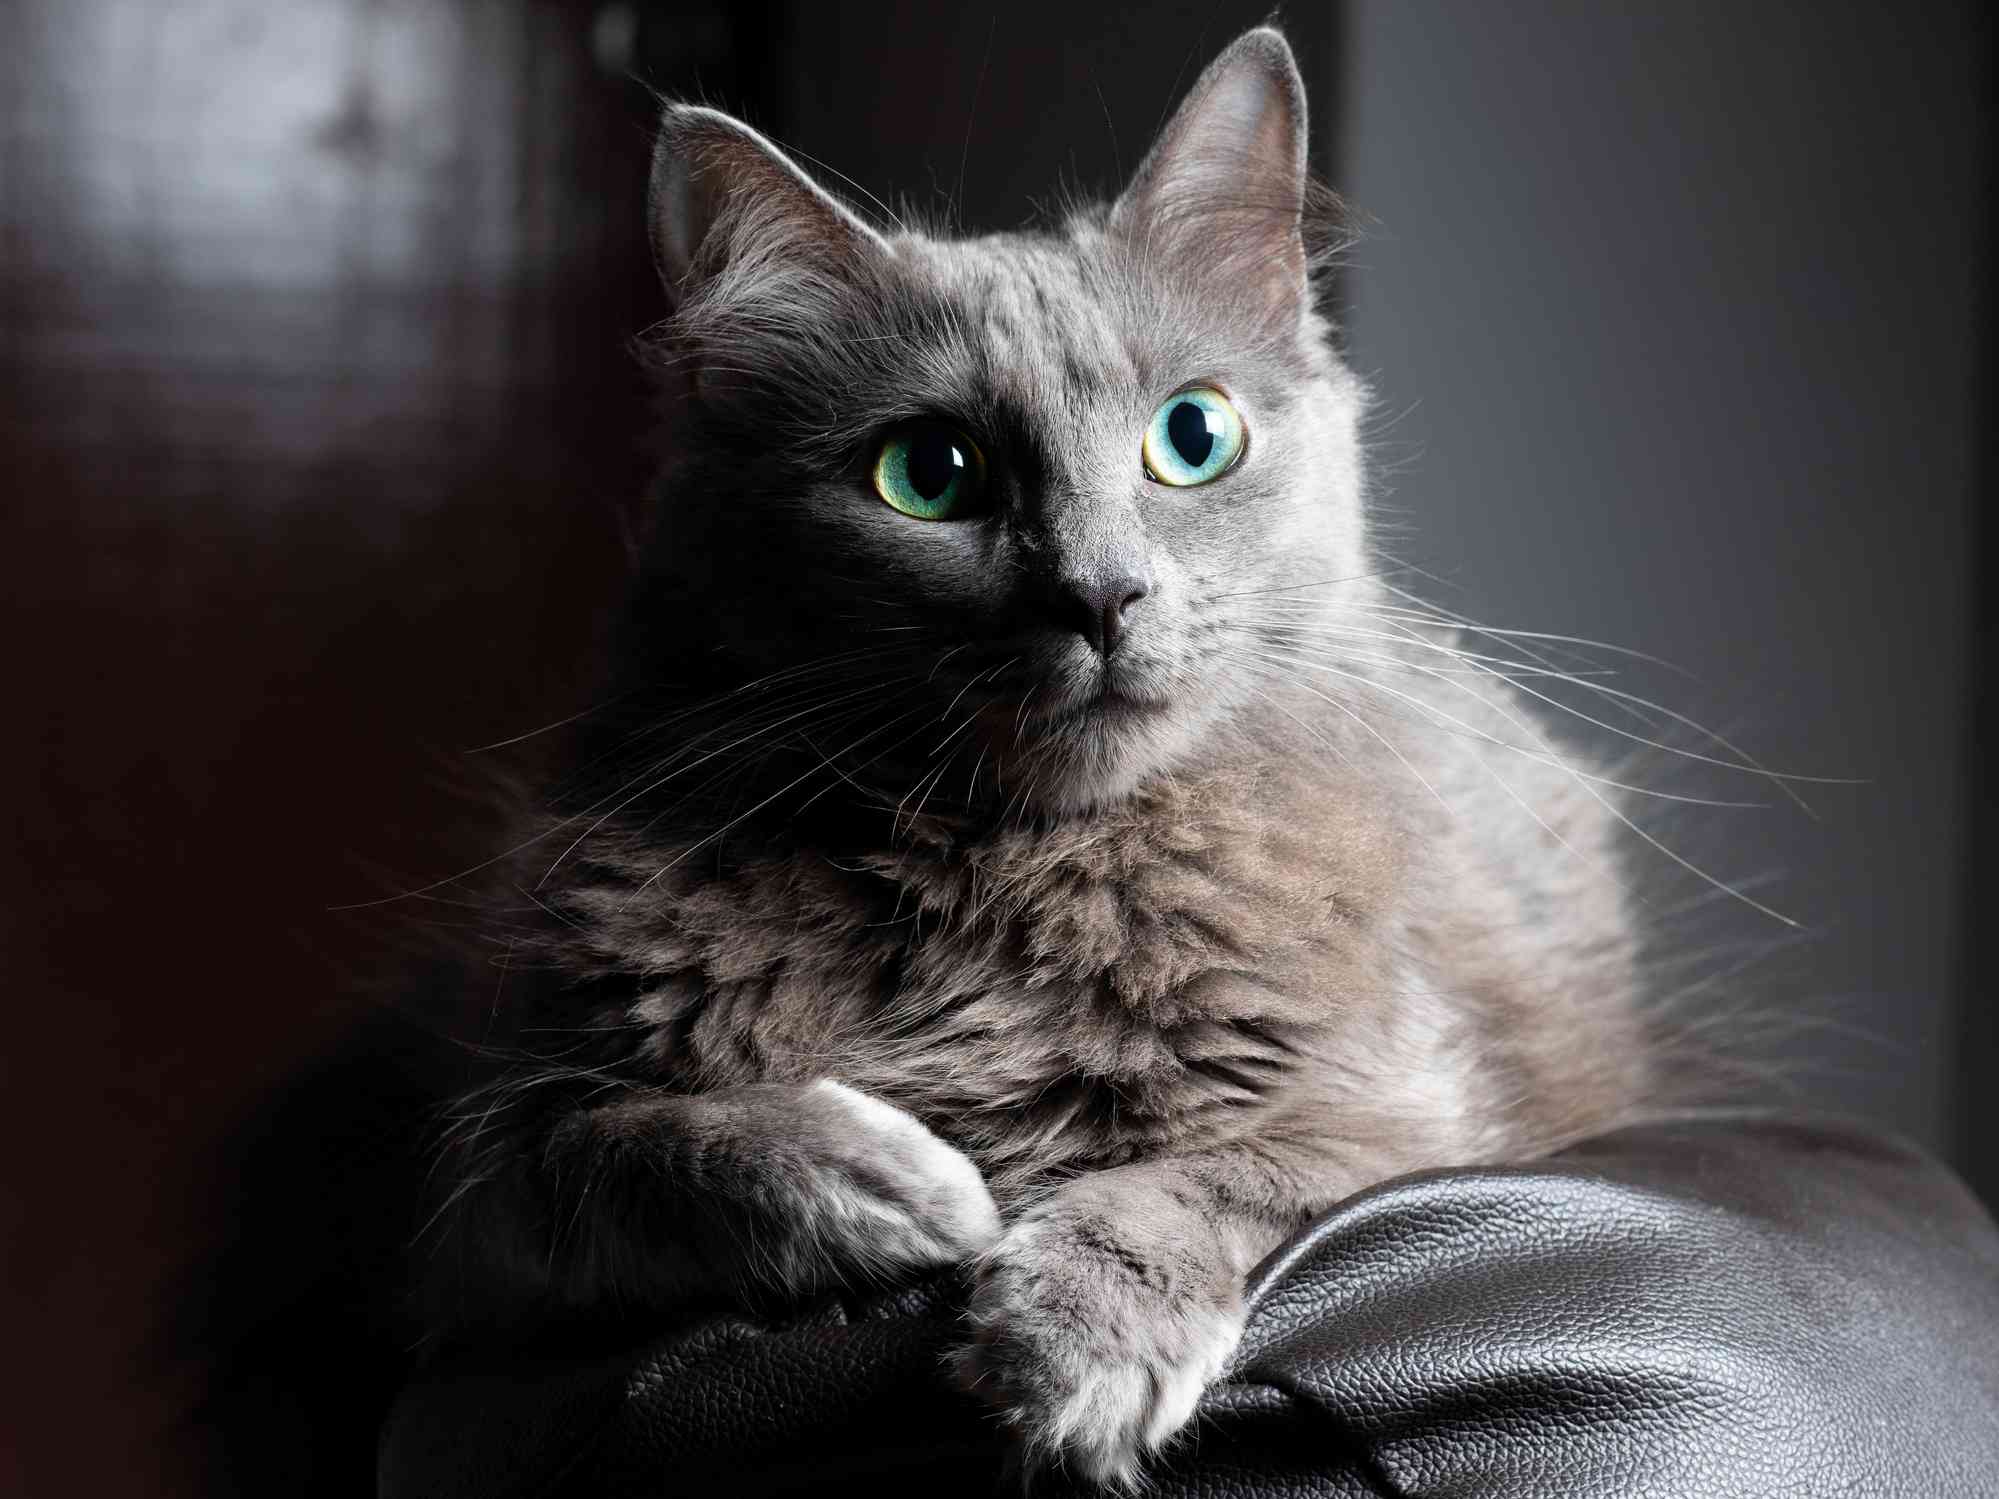 Nebelung cat with blue coat